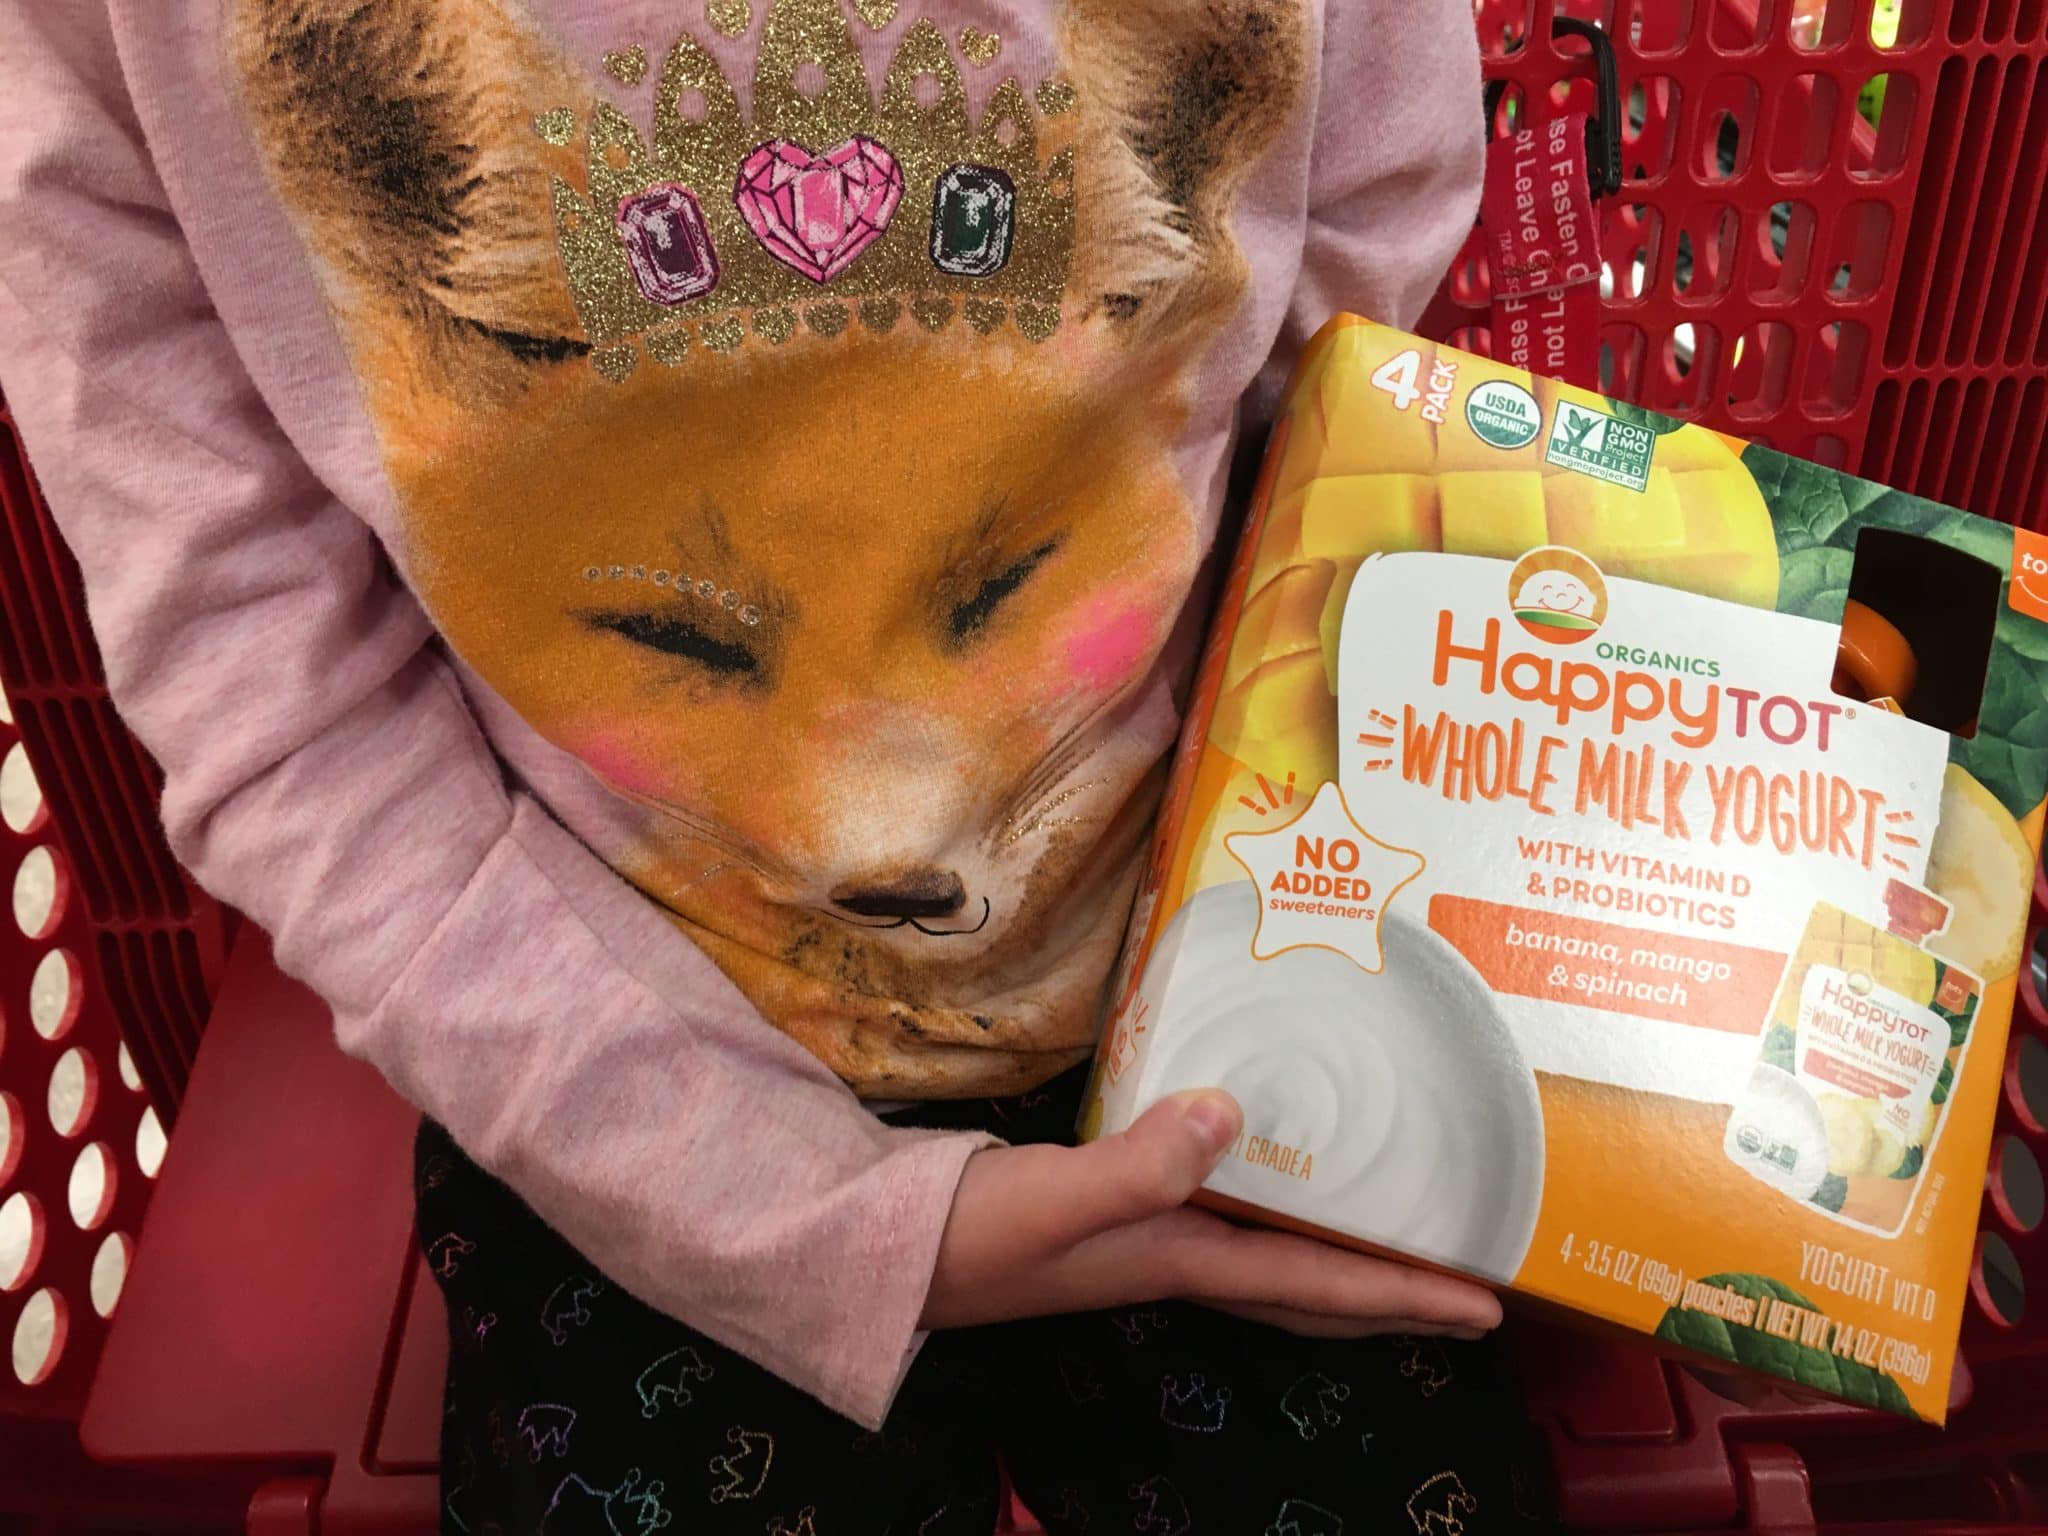 6 Tips to Make Snack Time Healthy – Featuring Happy Family Yogurt graphic